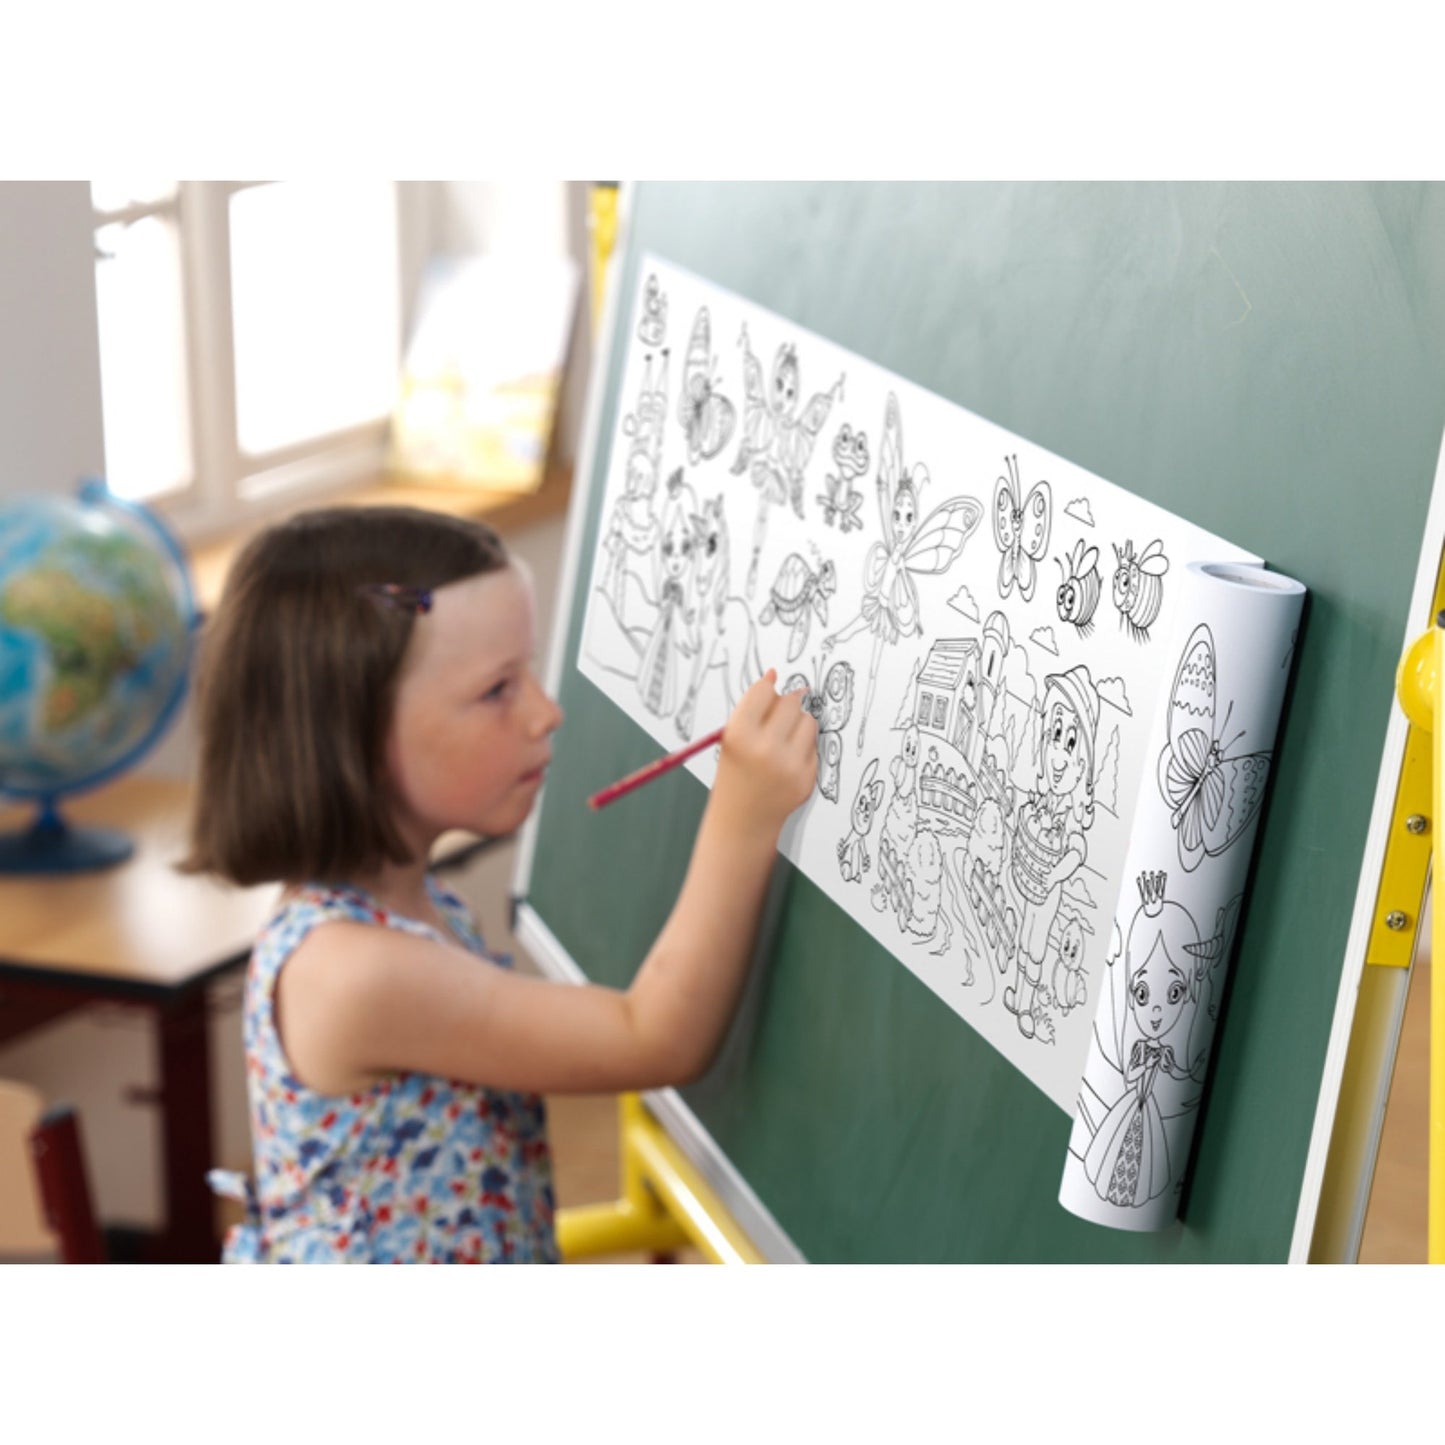 Self-Stick Colouring Book & Roll | Lifesavers | Girl Colouring Sheet Stuck to Wall | BeoVERDE.ie